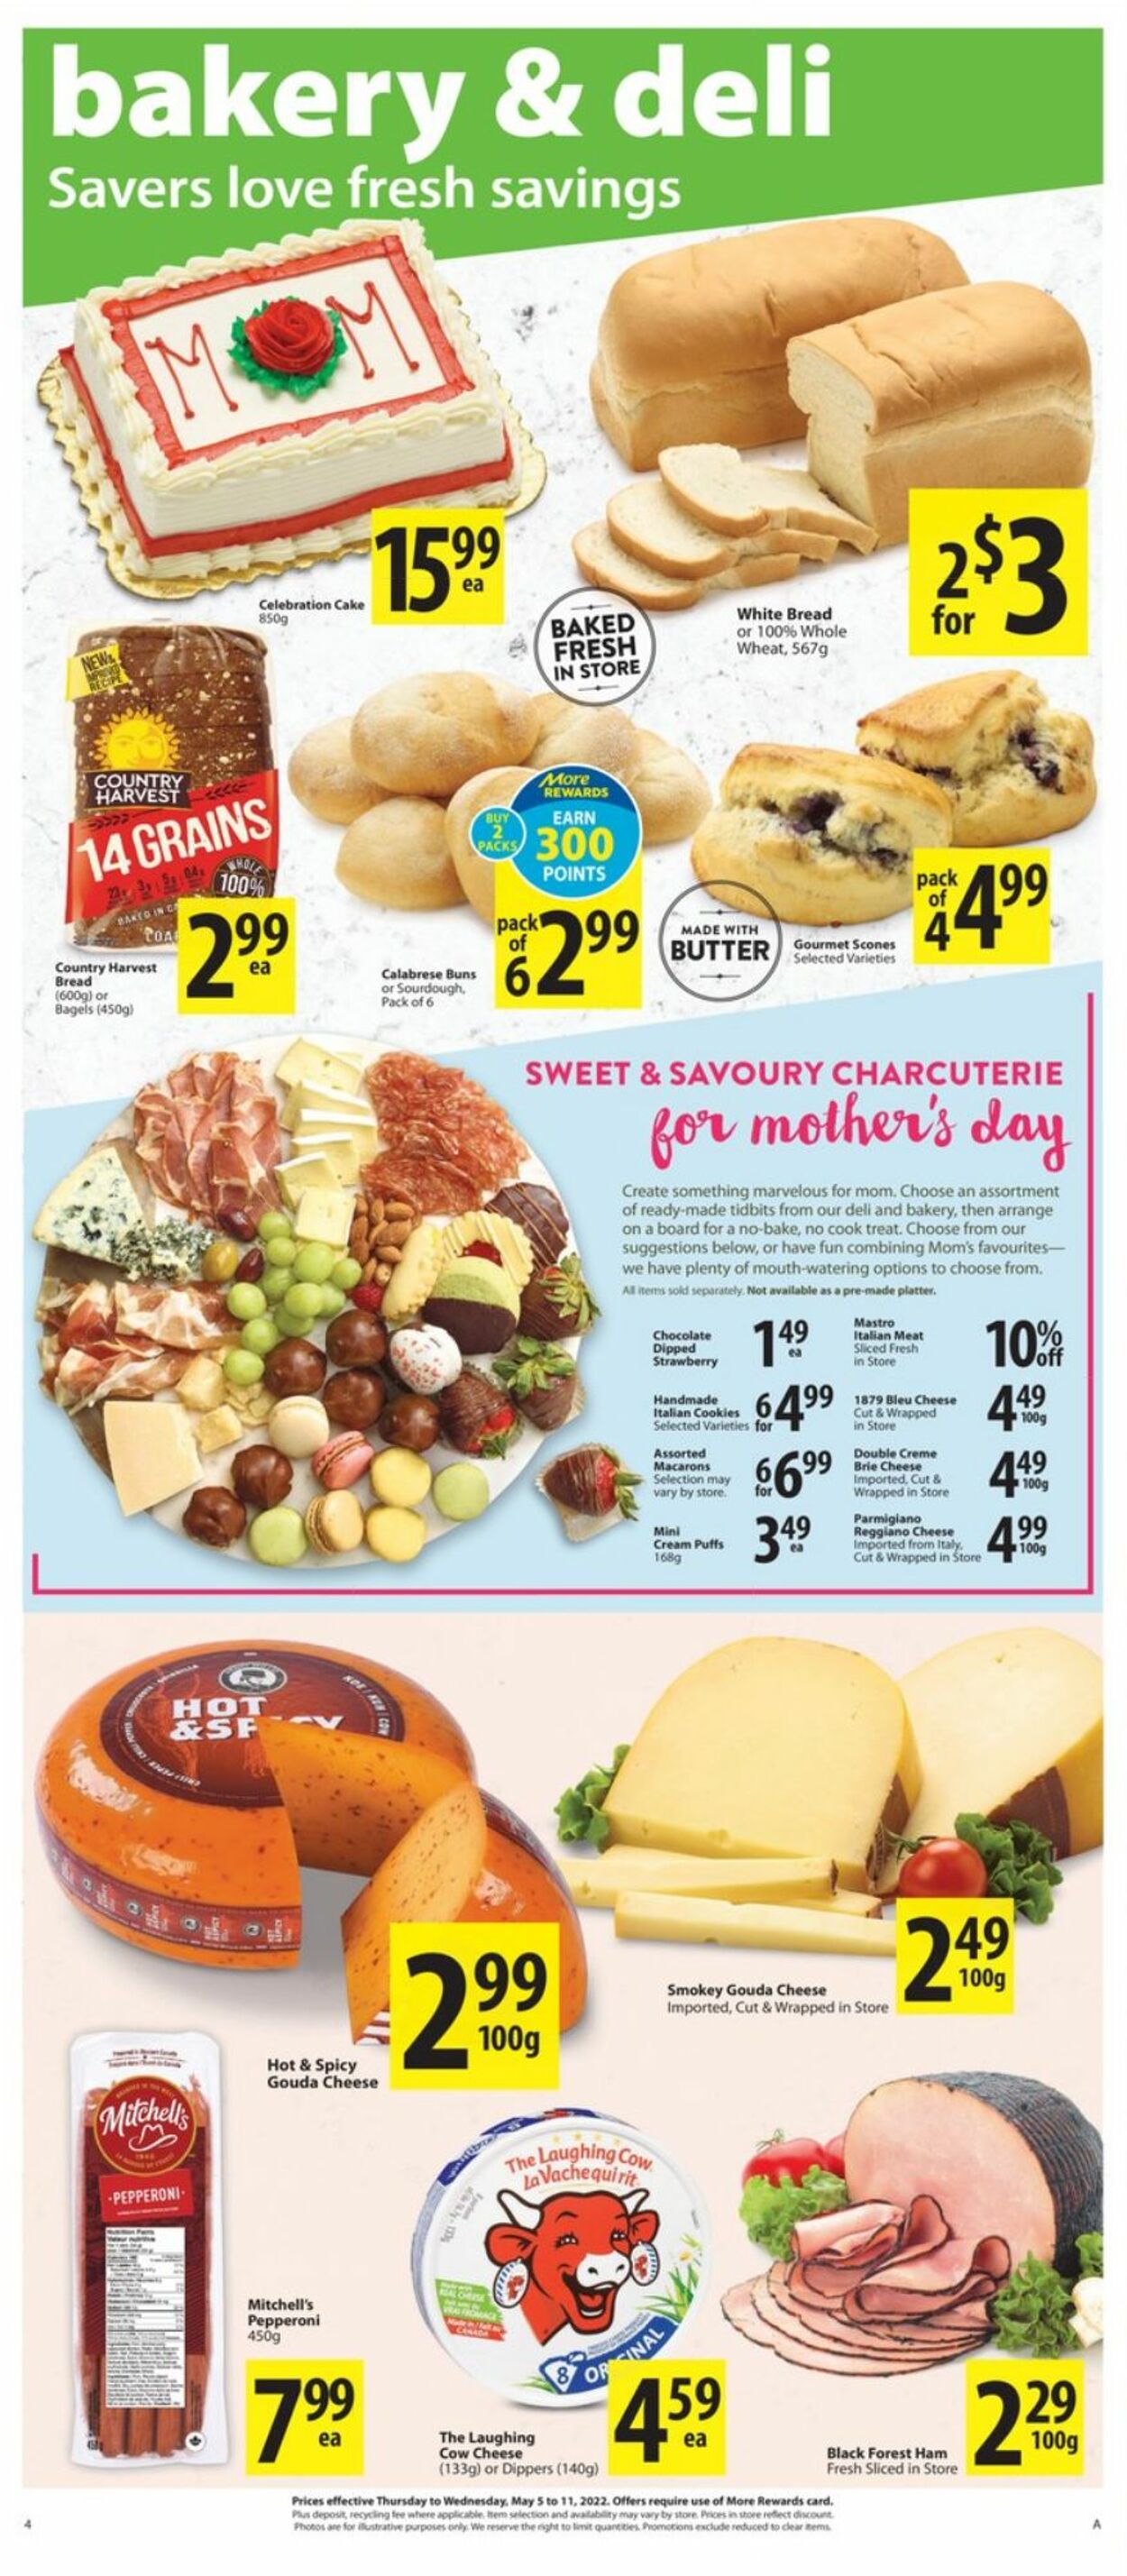 Flyer Save-On-Foods 05.05.2022 - 11.05.2022